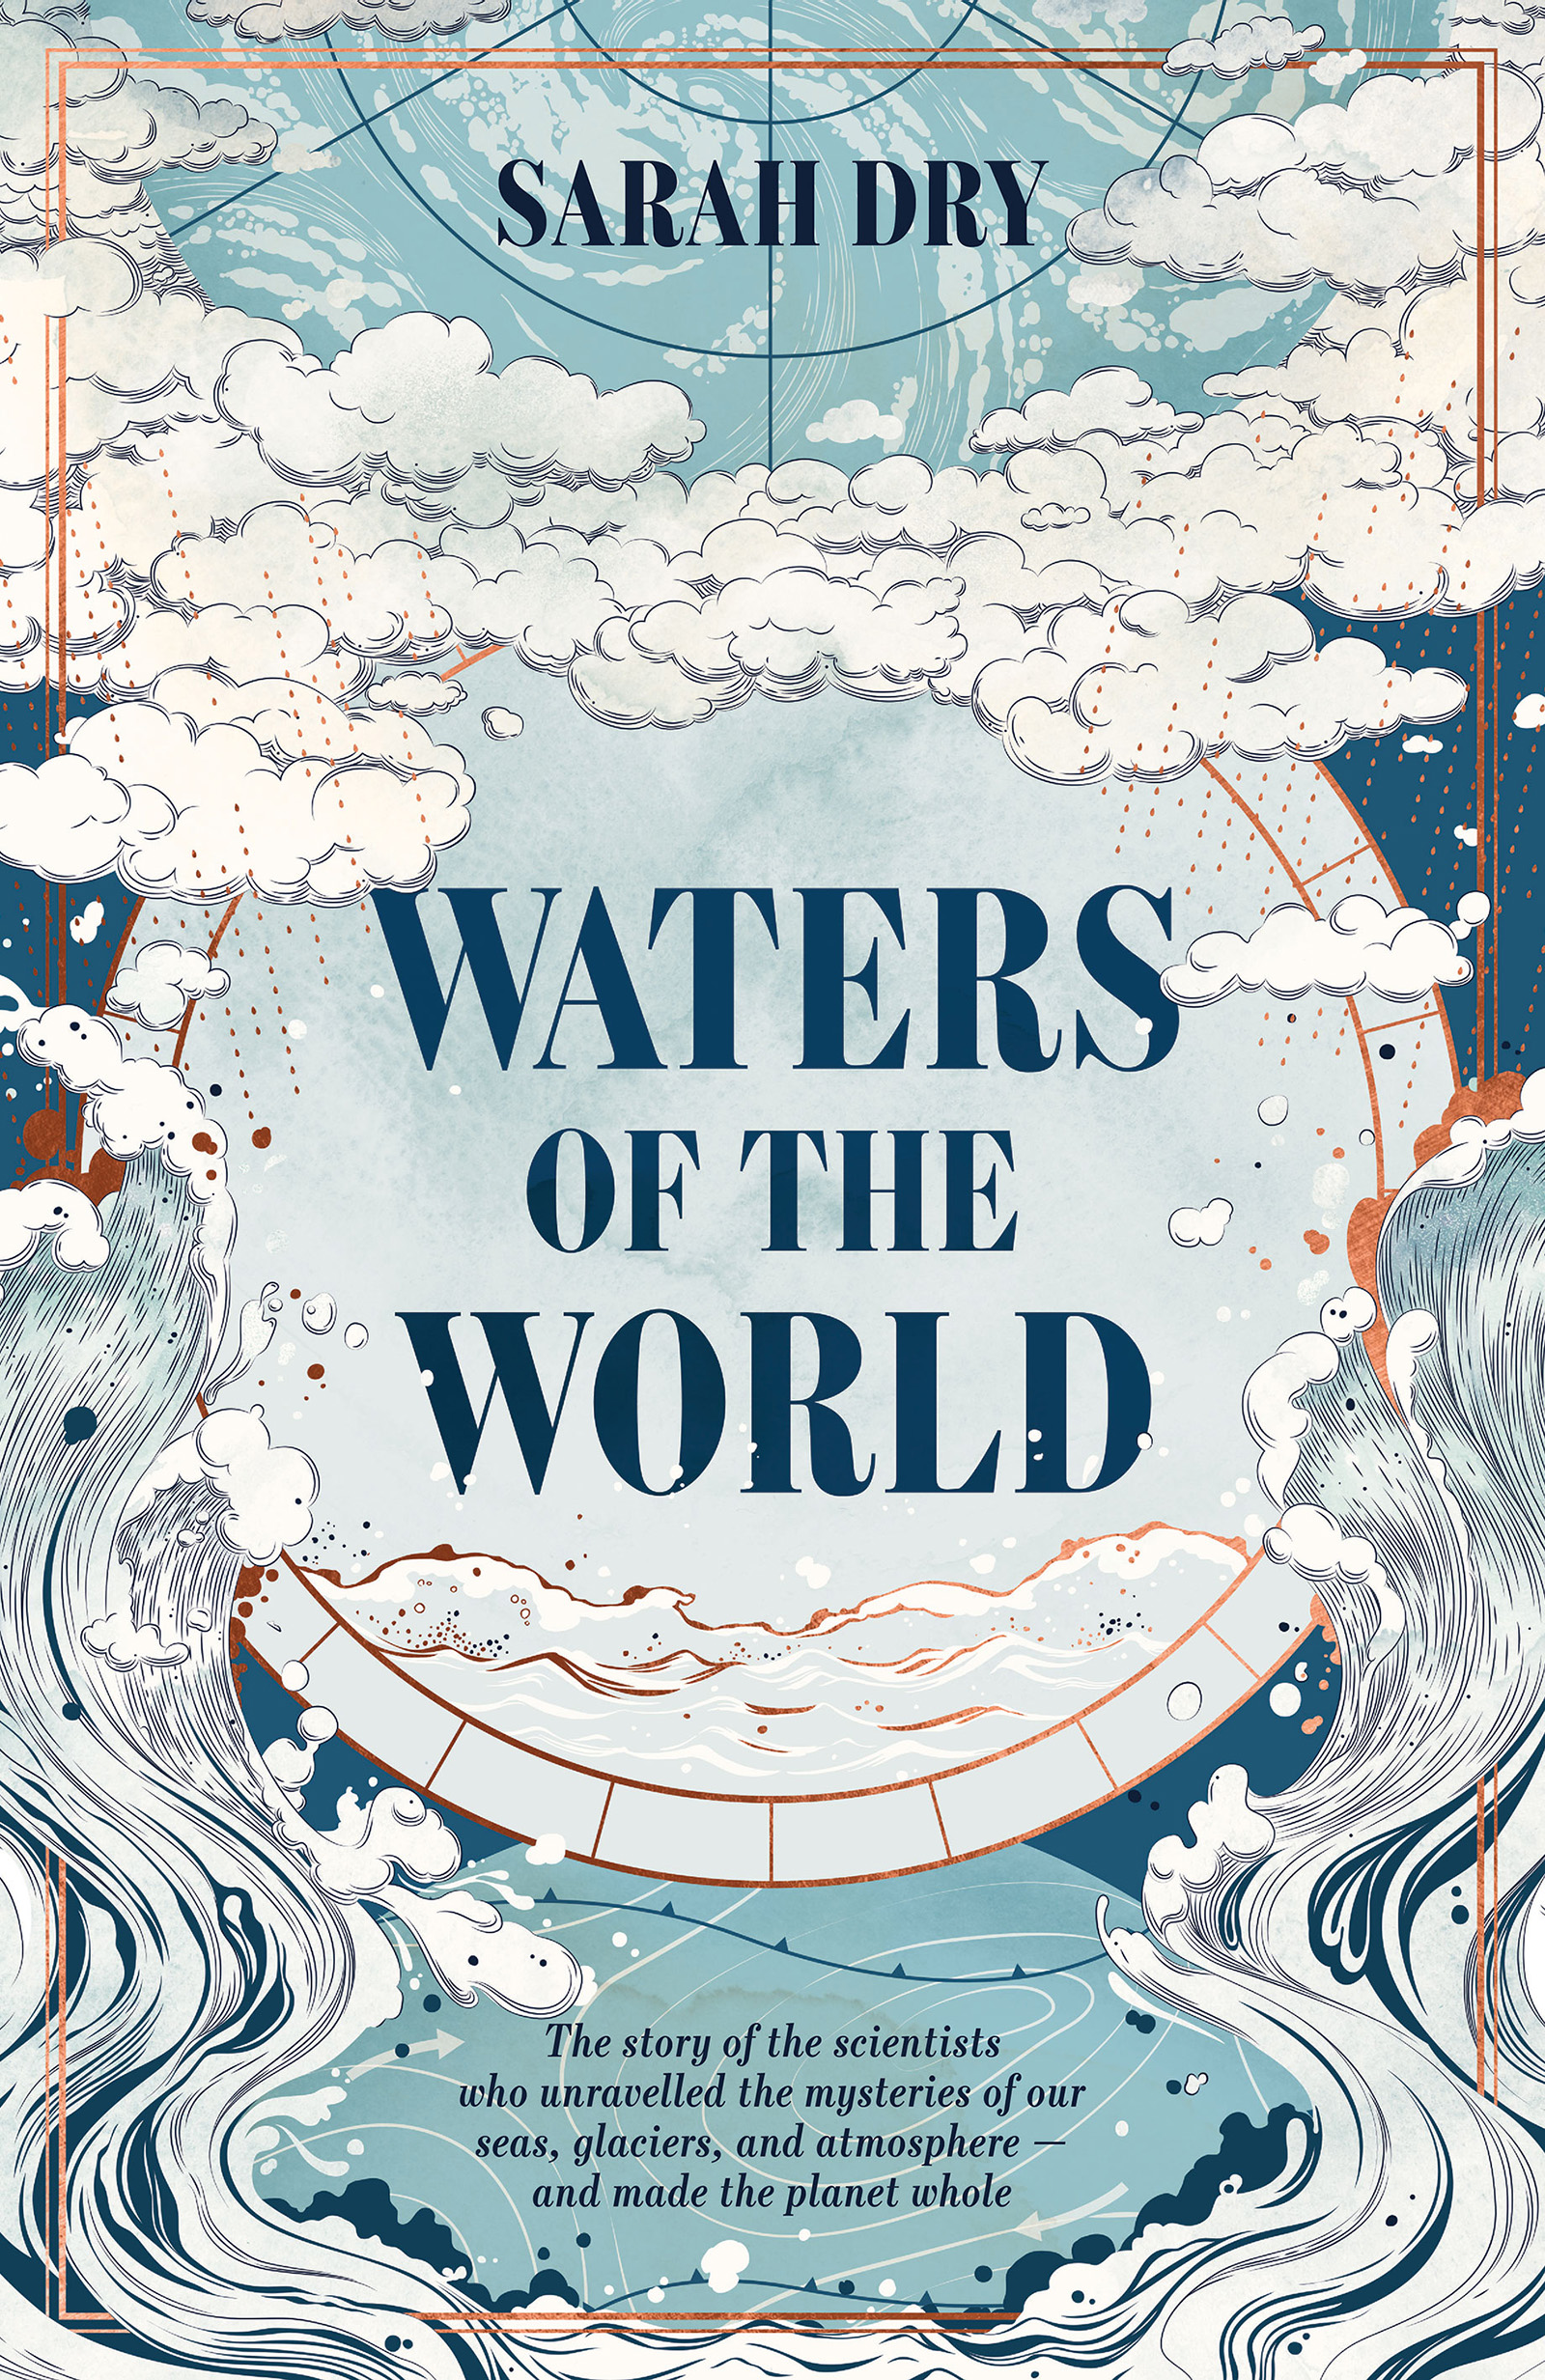 Front cover art for the book Waters of the World